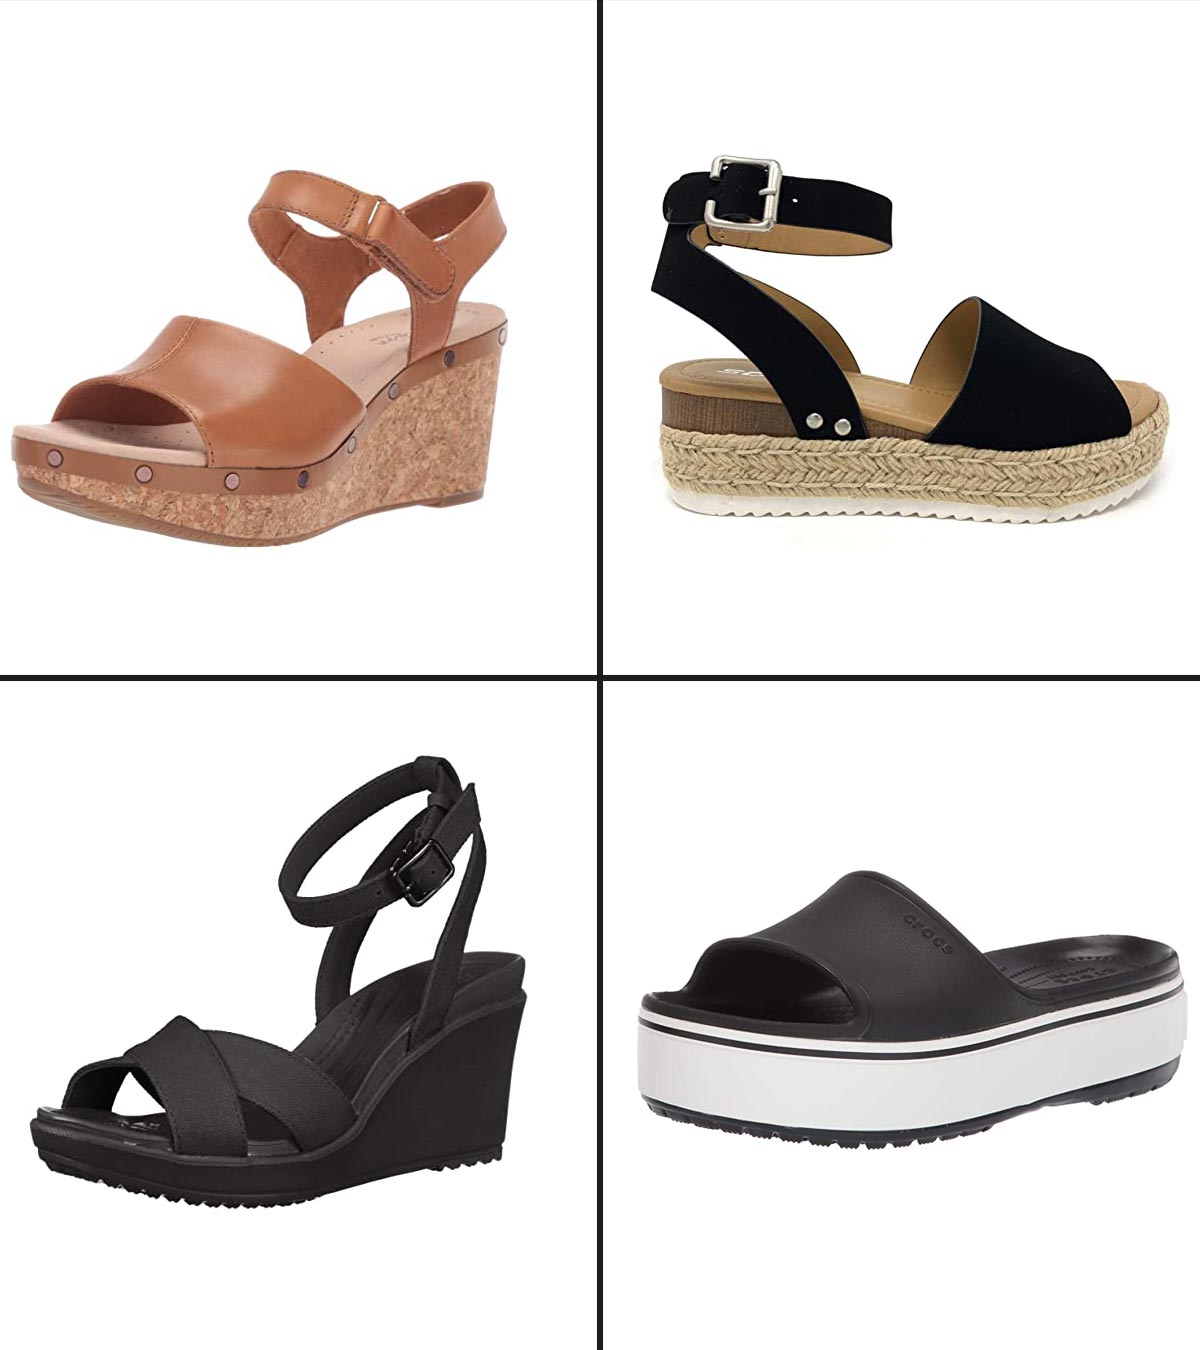 Platform Sandals Are Trending and Amazon Has Styles Under 50